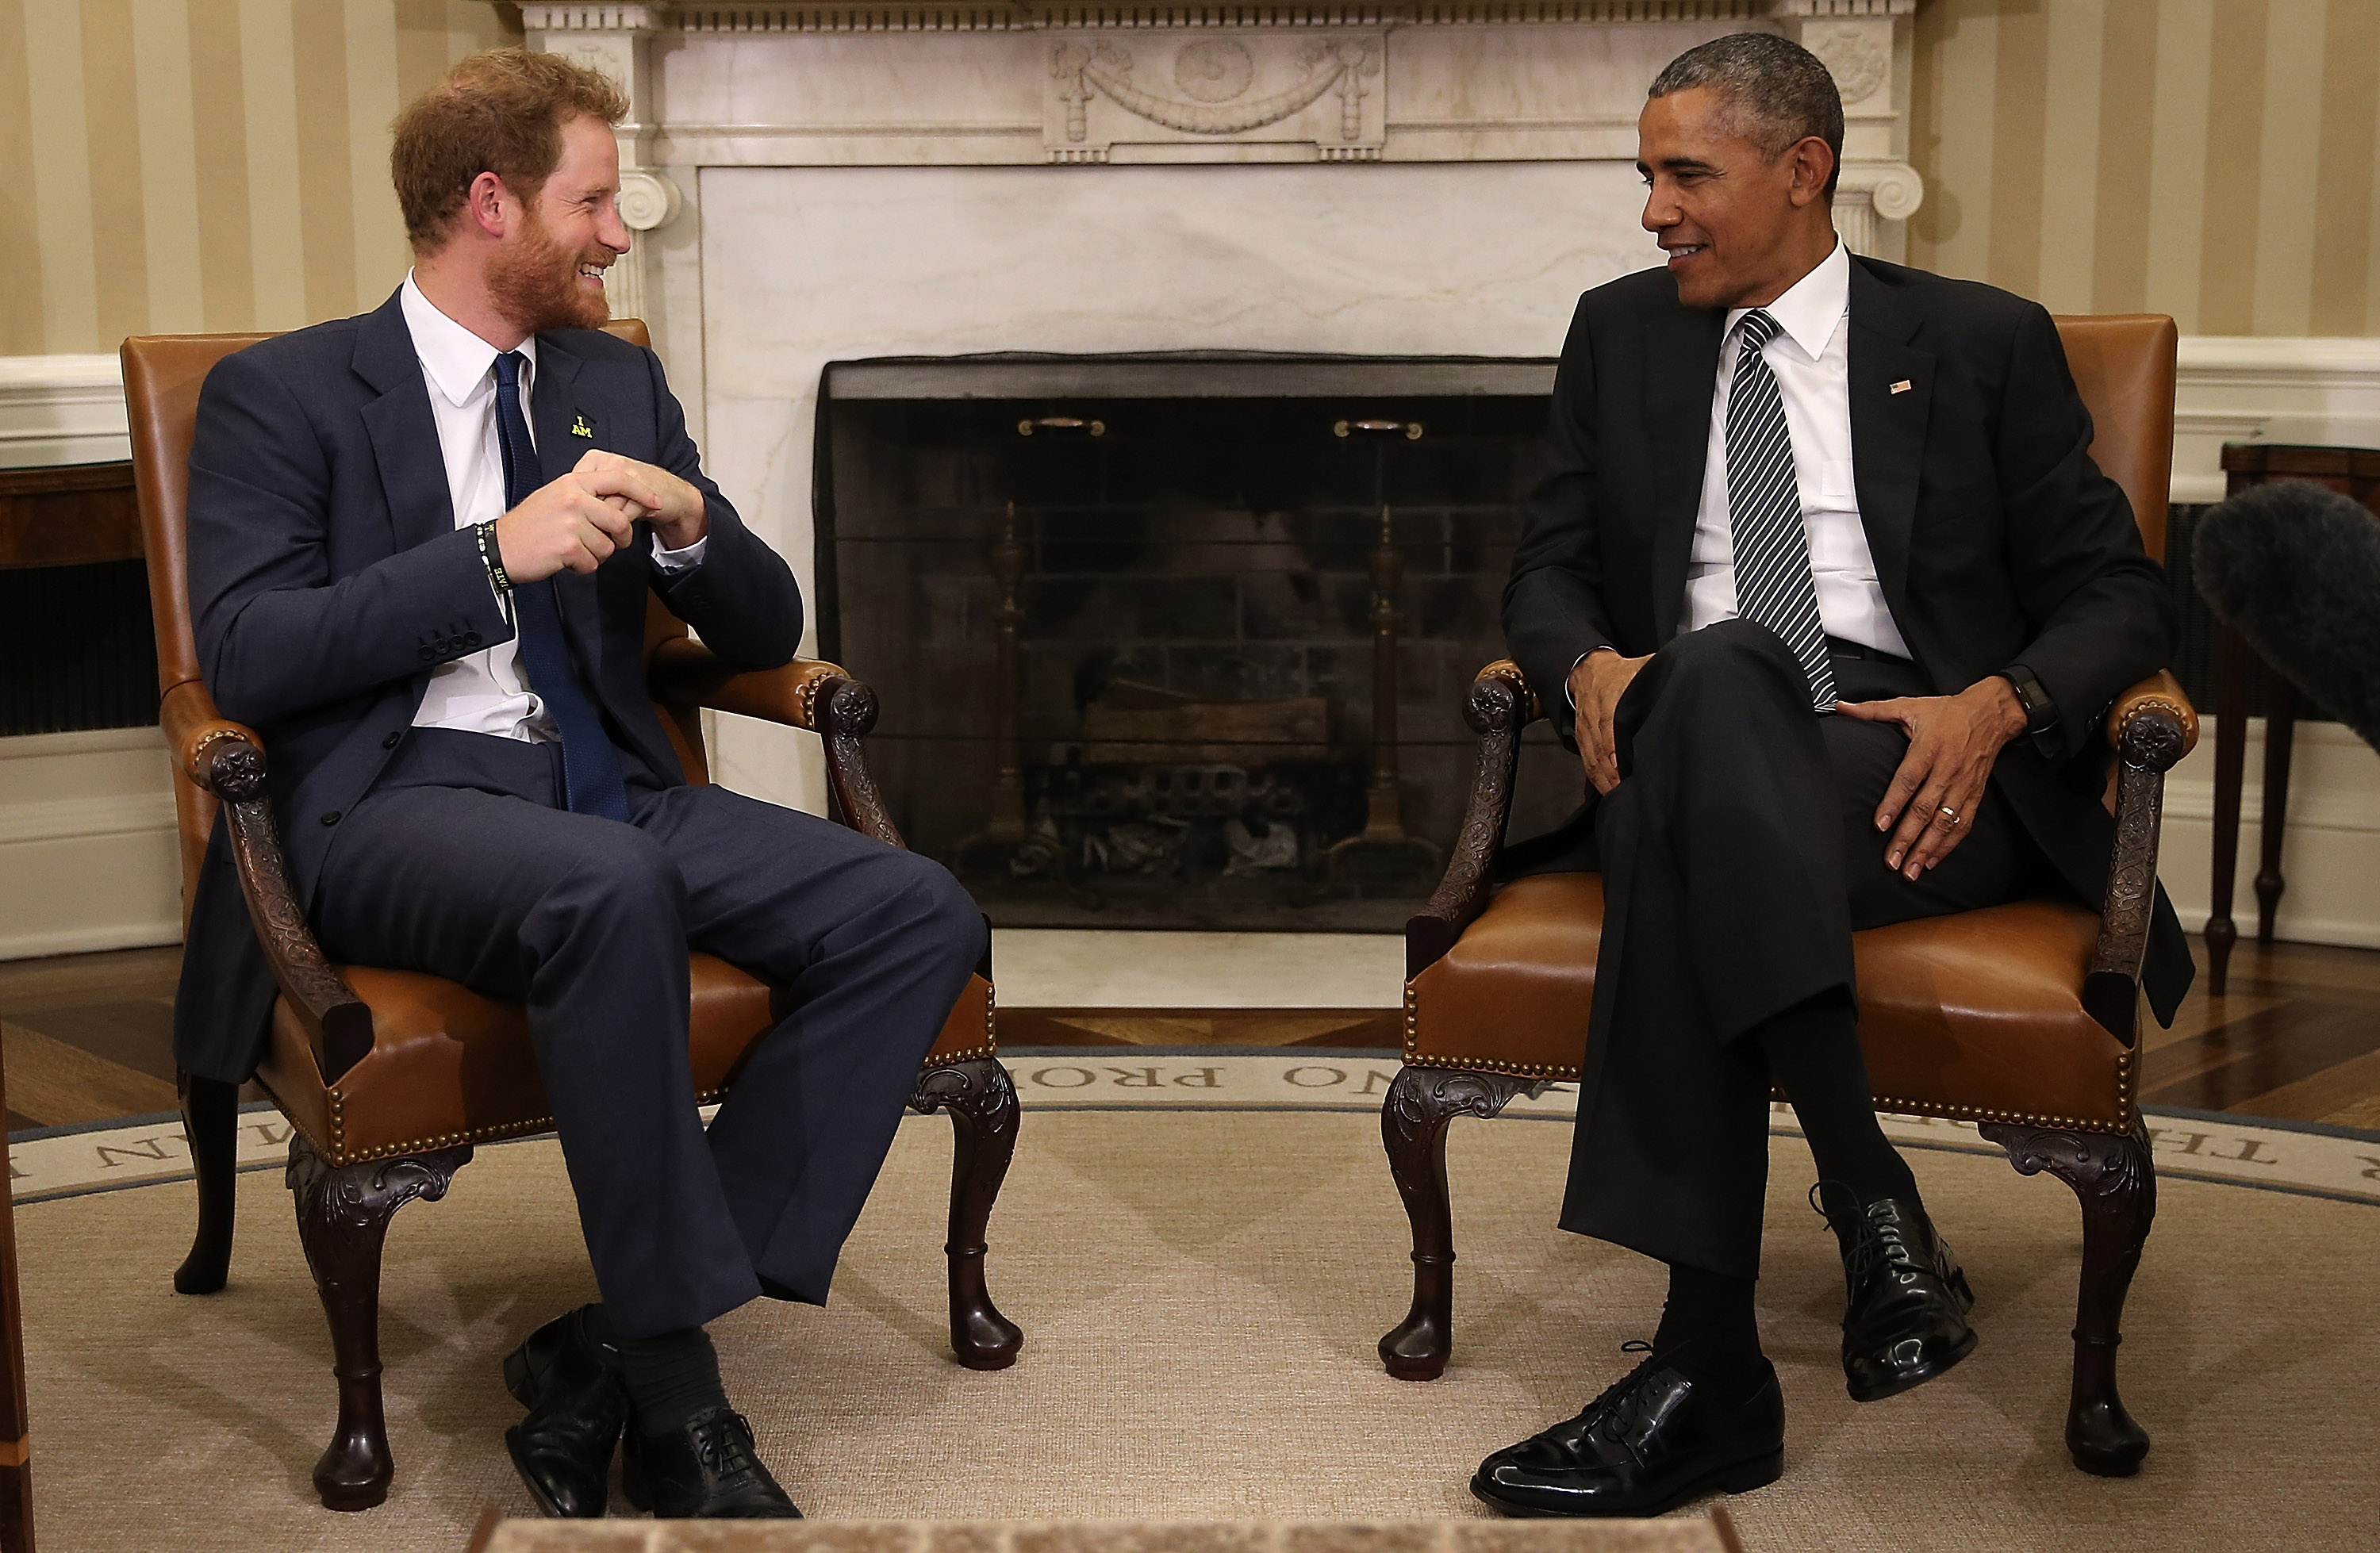 President Barack Obama meets with Prince Harry in the Oval Office of the White House in Washington, D.C., 28 Oct. 2015. (Win McNamee—EPA)